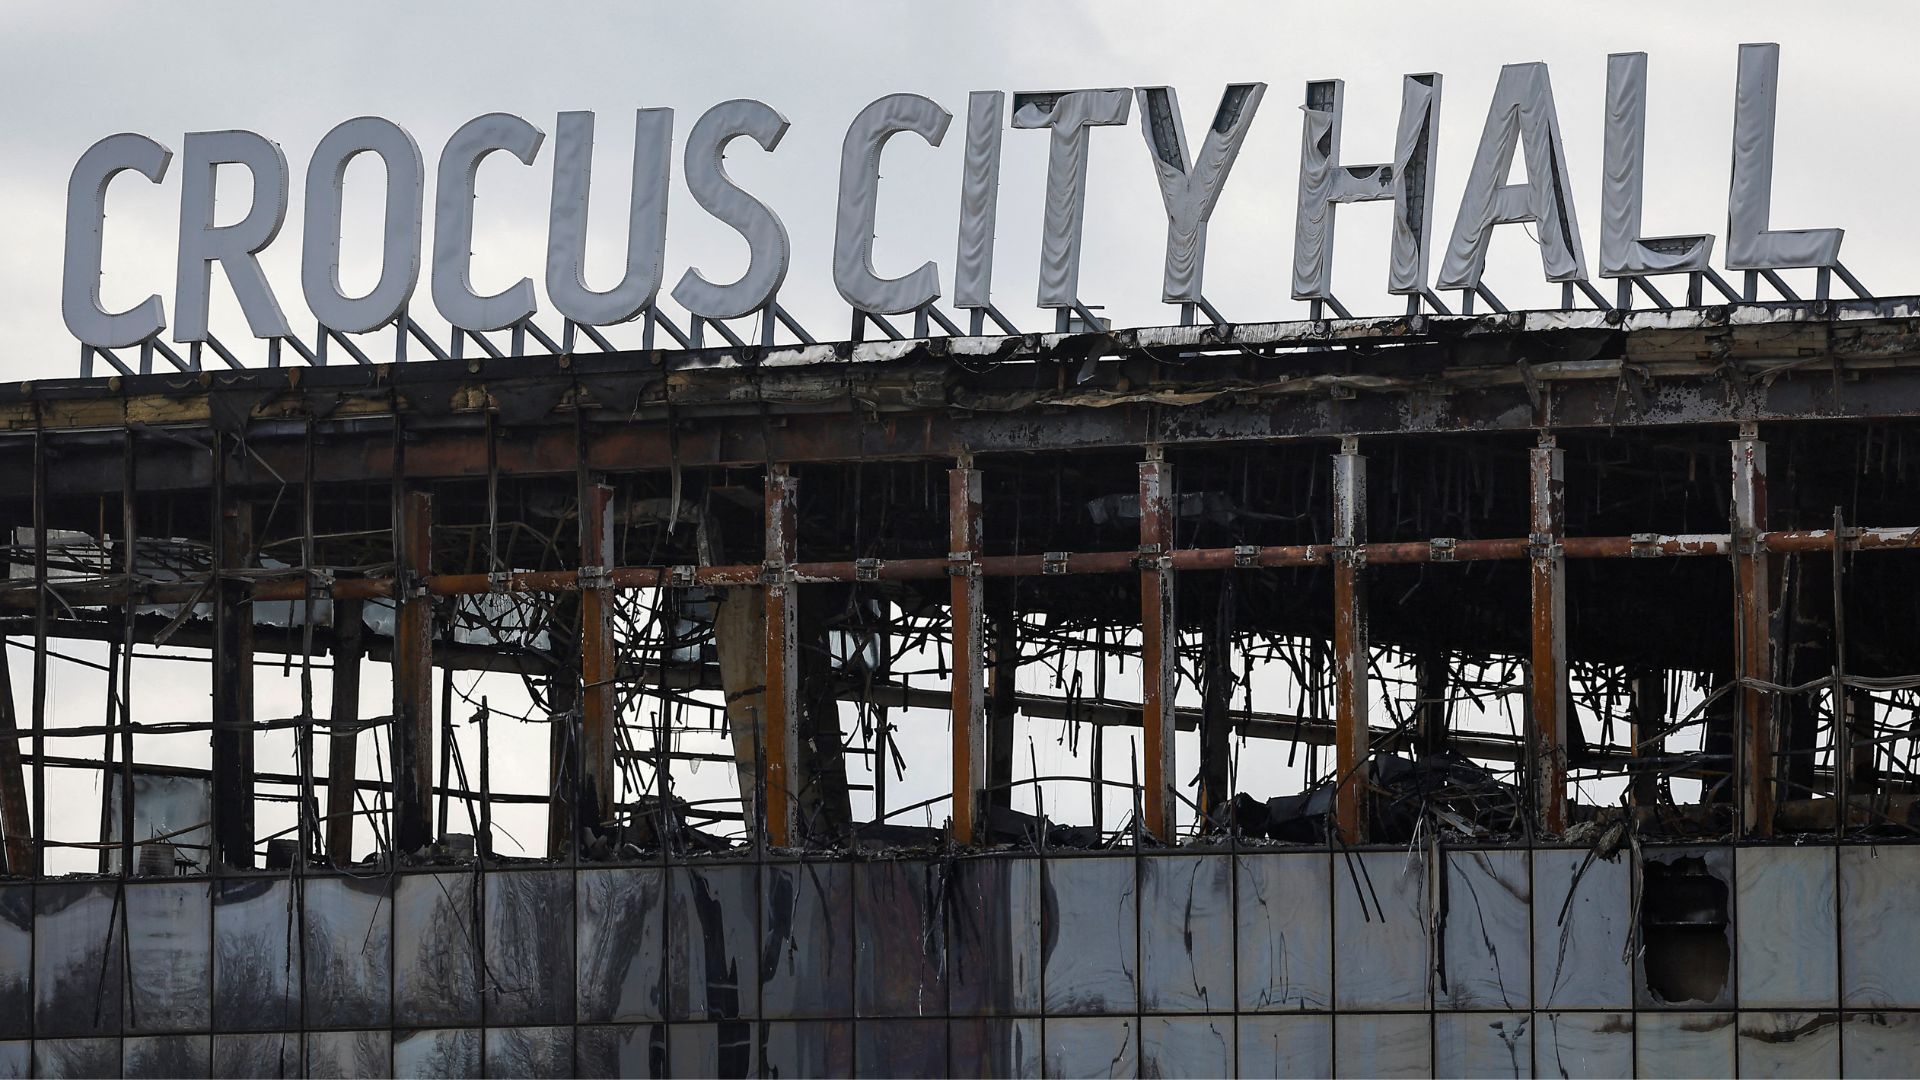 Parts of Crocus City Hall were engulfed in flames after gunmen stormed the concert venue on March 22. /Evgenia Novozhenina/Reuters